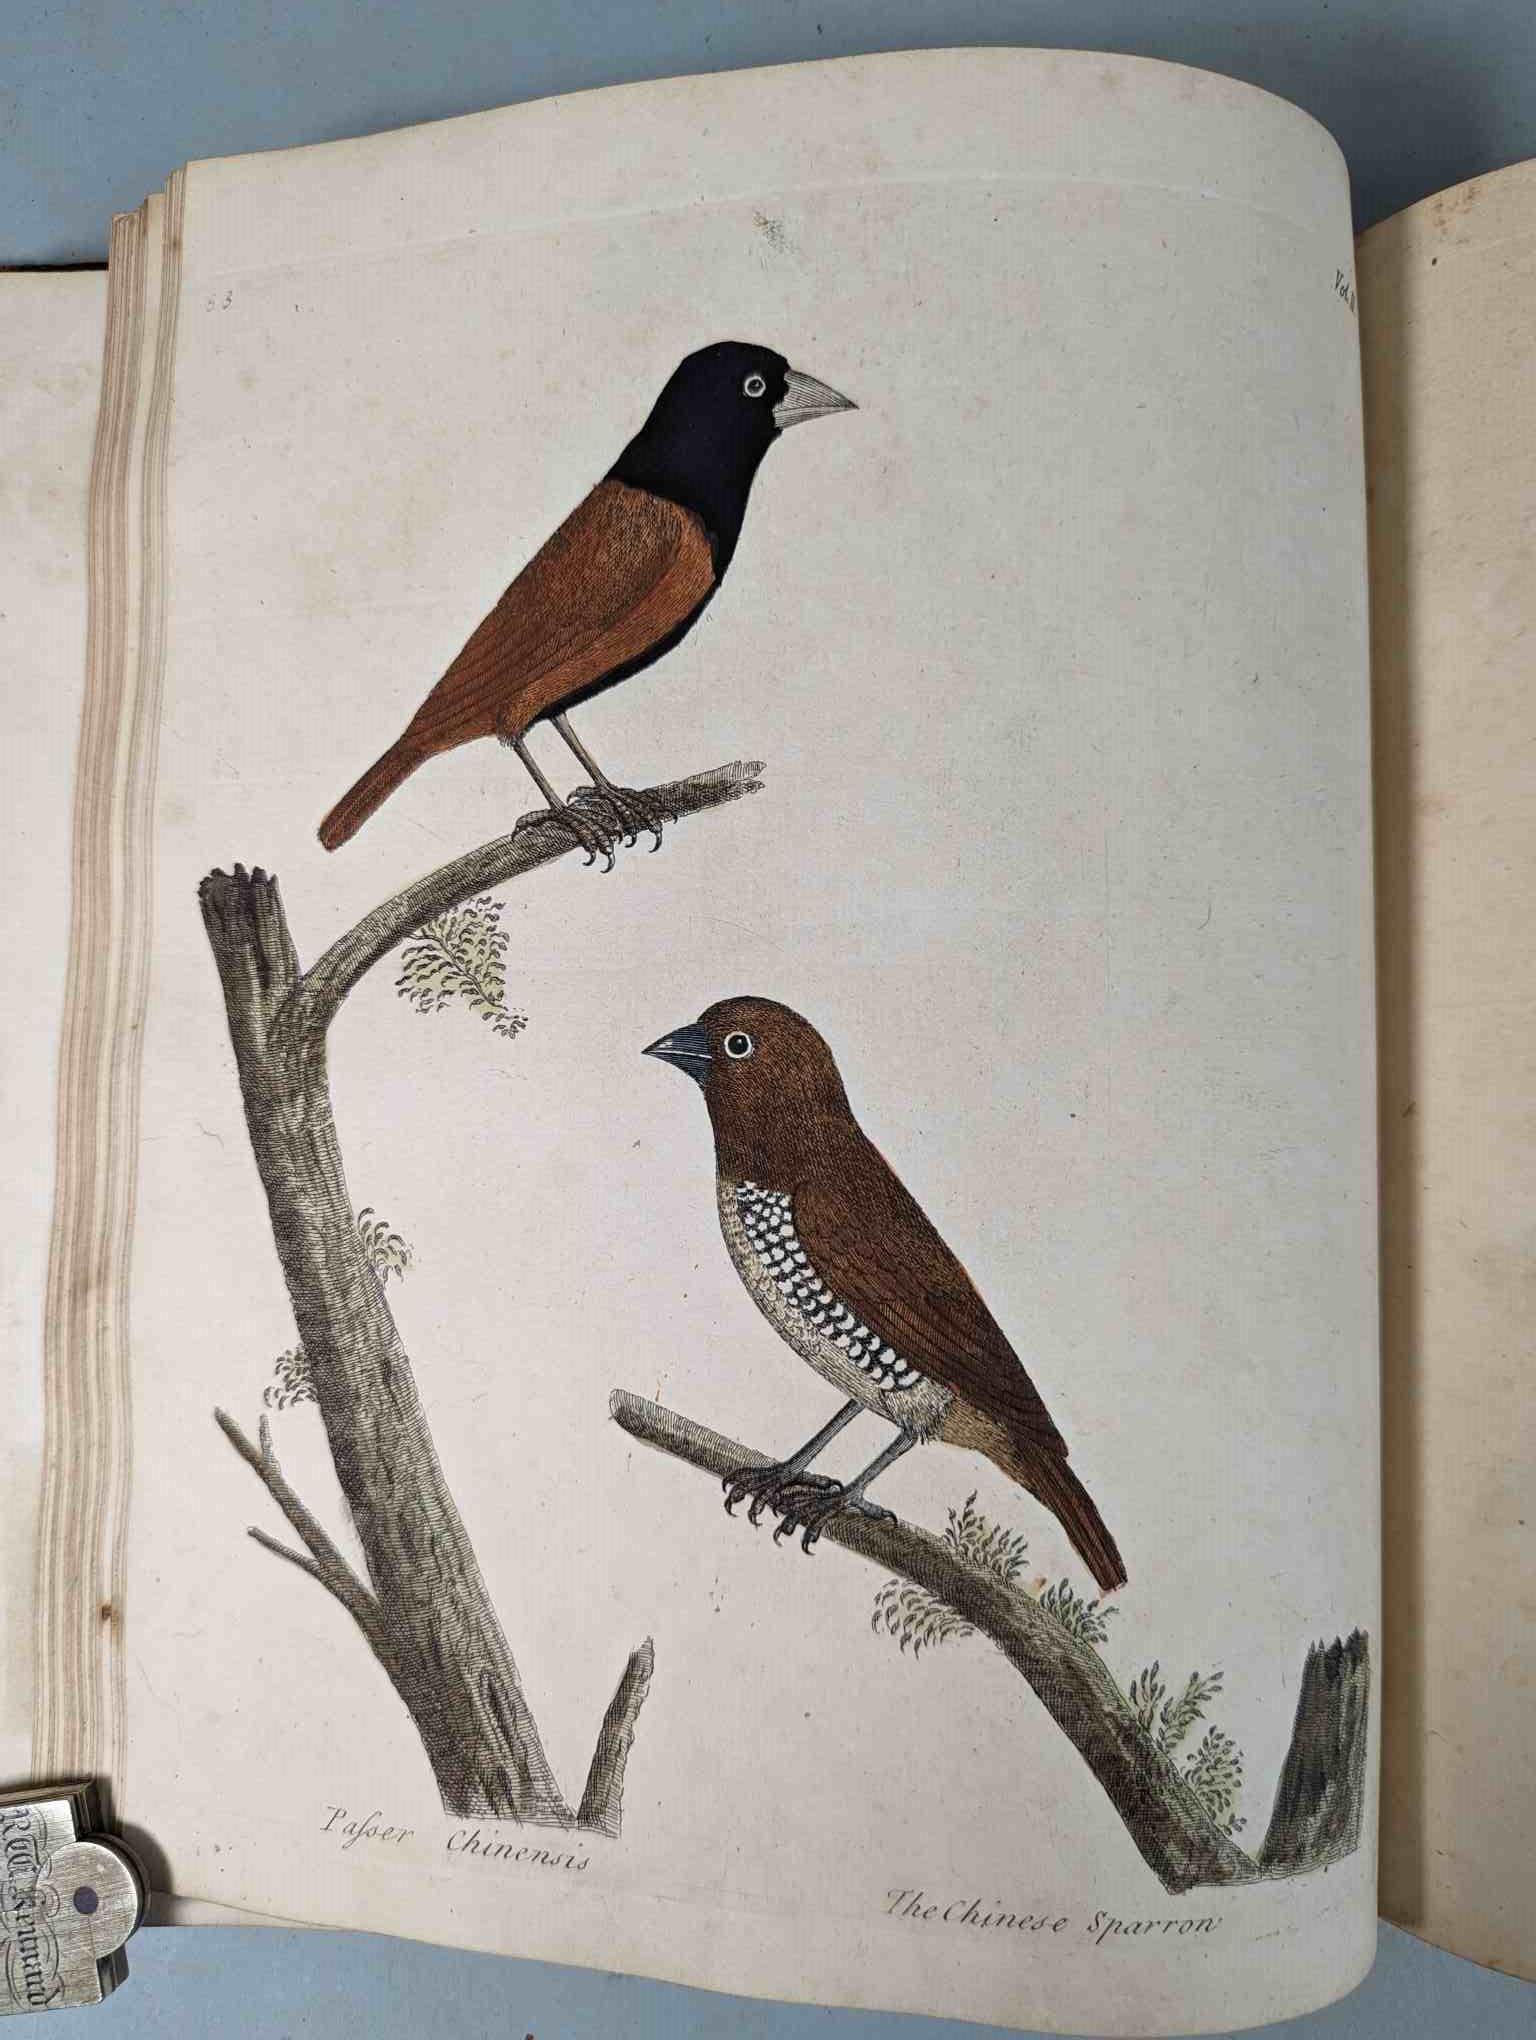 ALBIN, Eleazar. A Natural History of Birds, to which are added, Notes and Observations by W. - Image 157 of 208